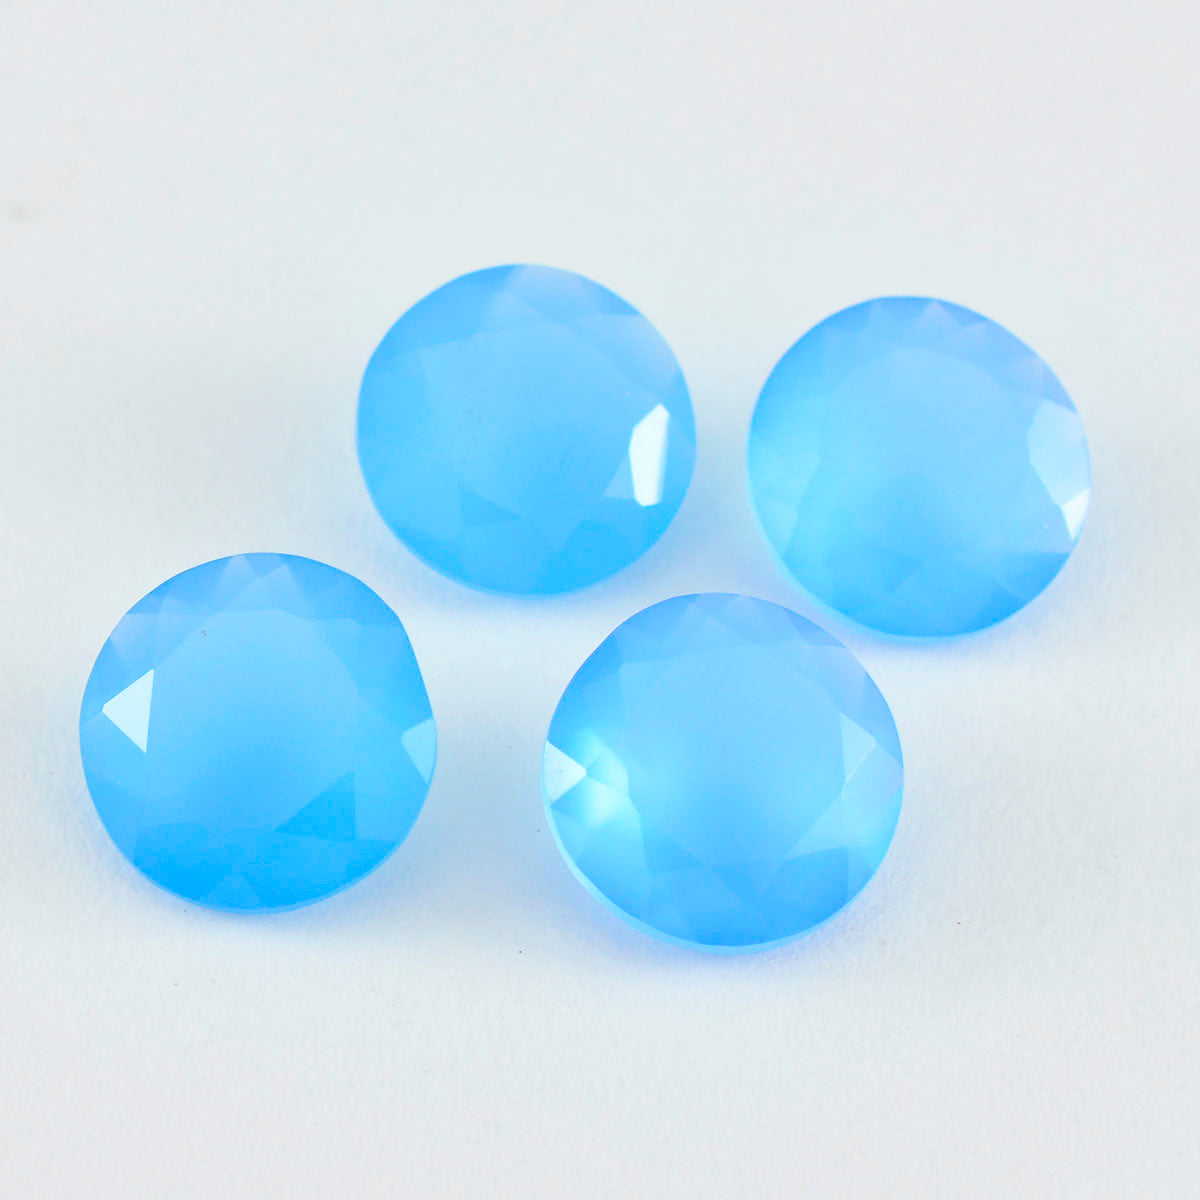 Riyogems 1PC Natural Blue Chalcedony Faceted 12x12 mm Round Shape cute Quality Loose Gemstone